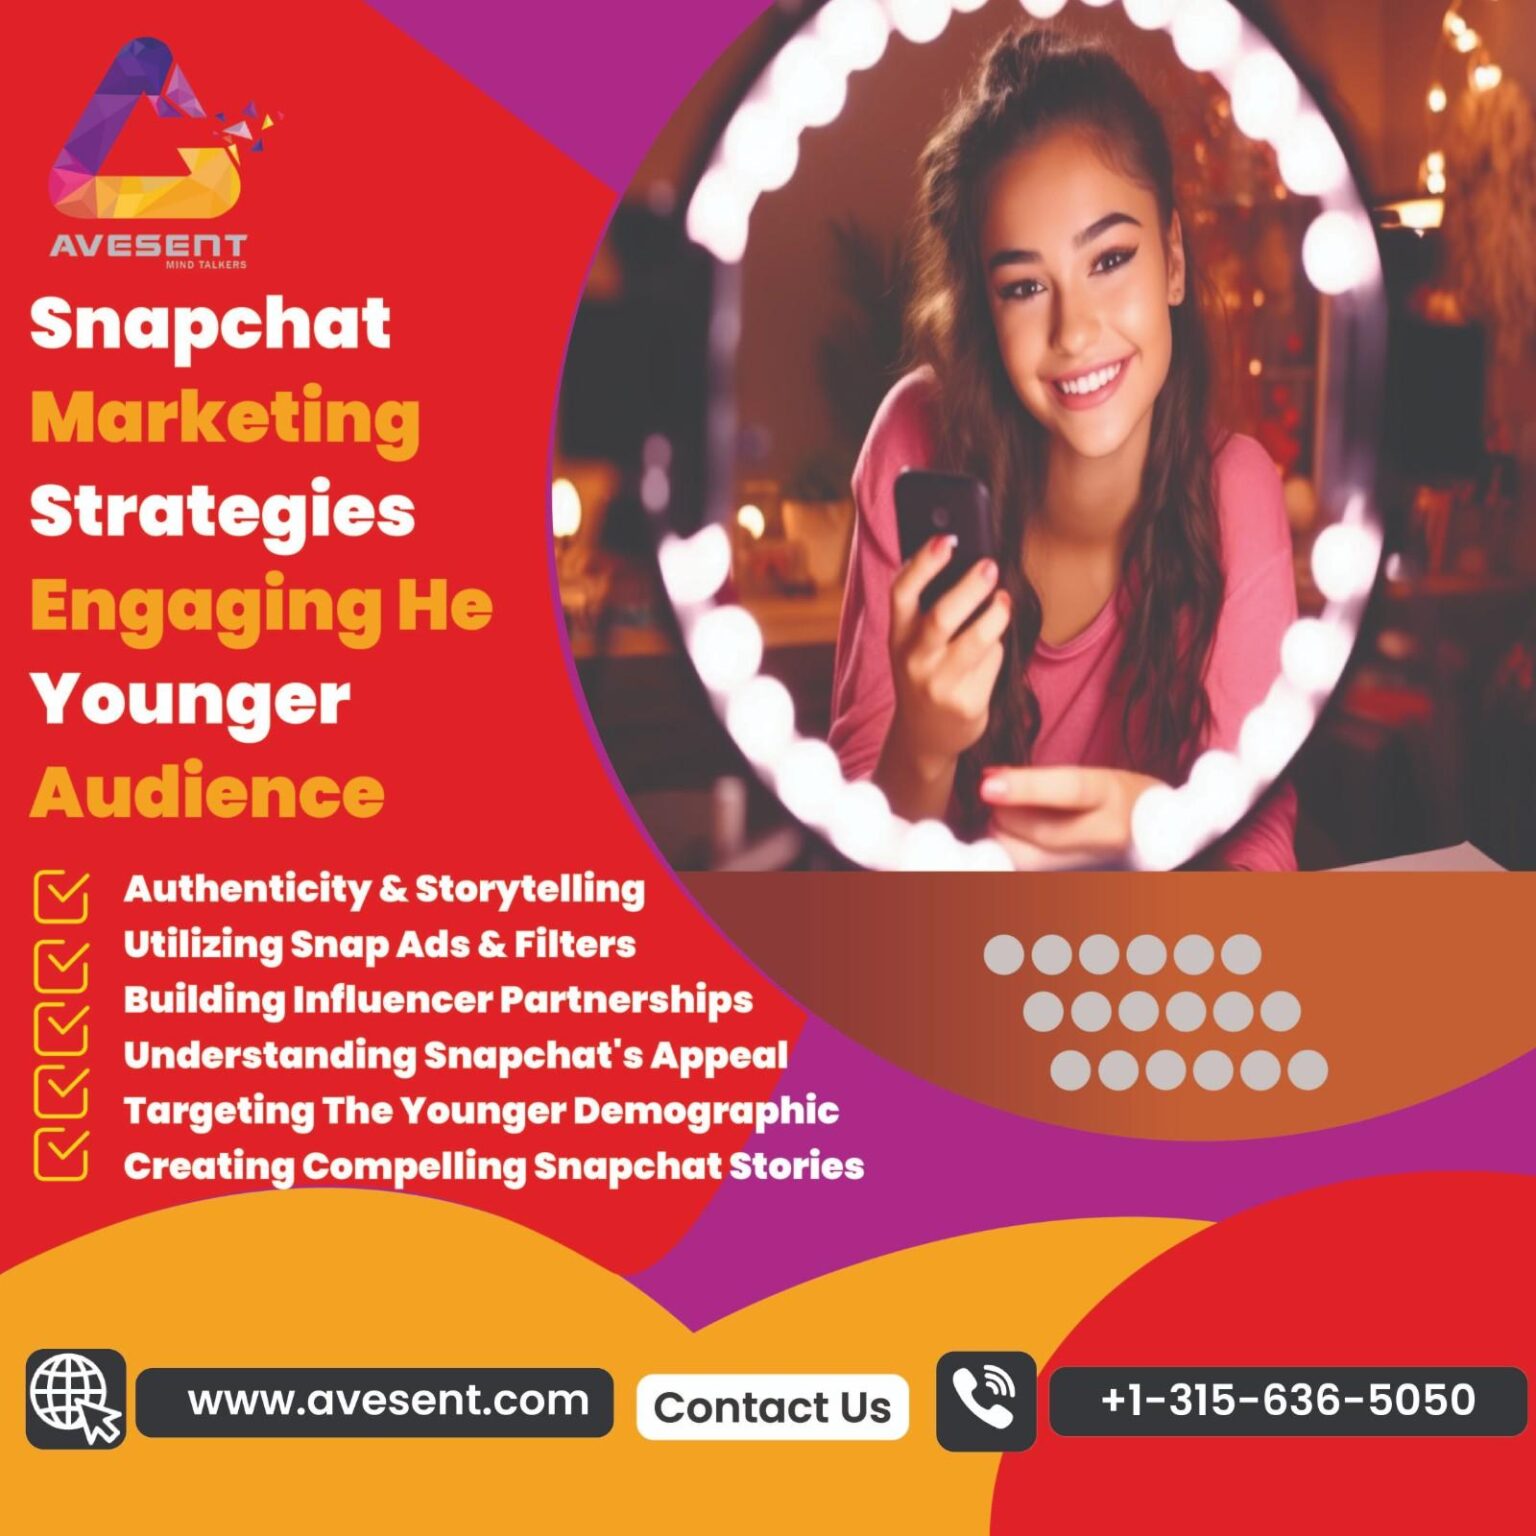 You are currently viewing Snapchat Marketing Strategies Engaging the Younger Audience